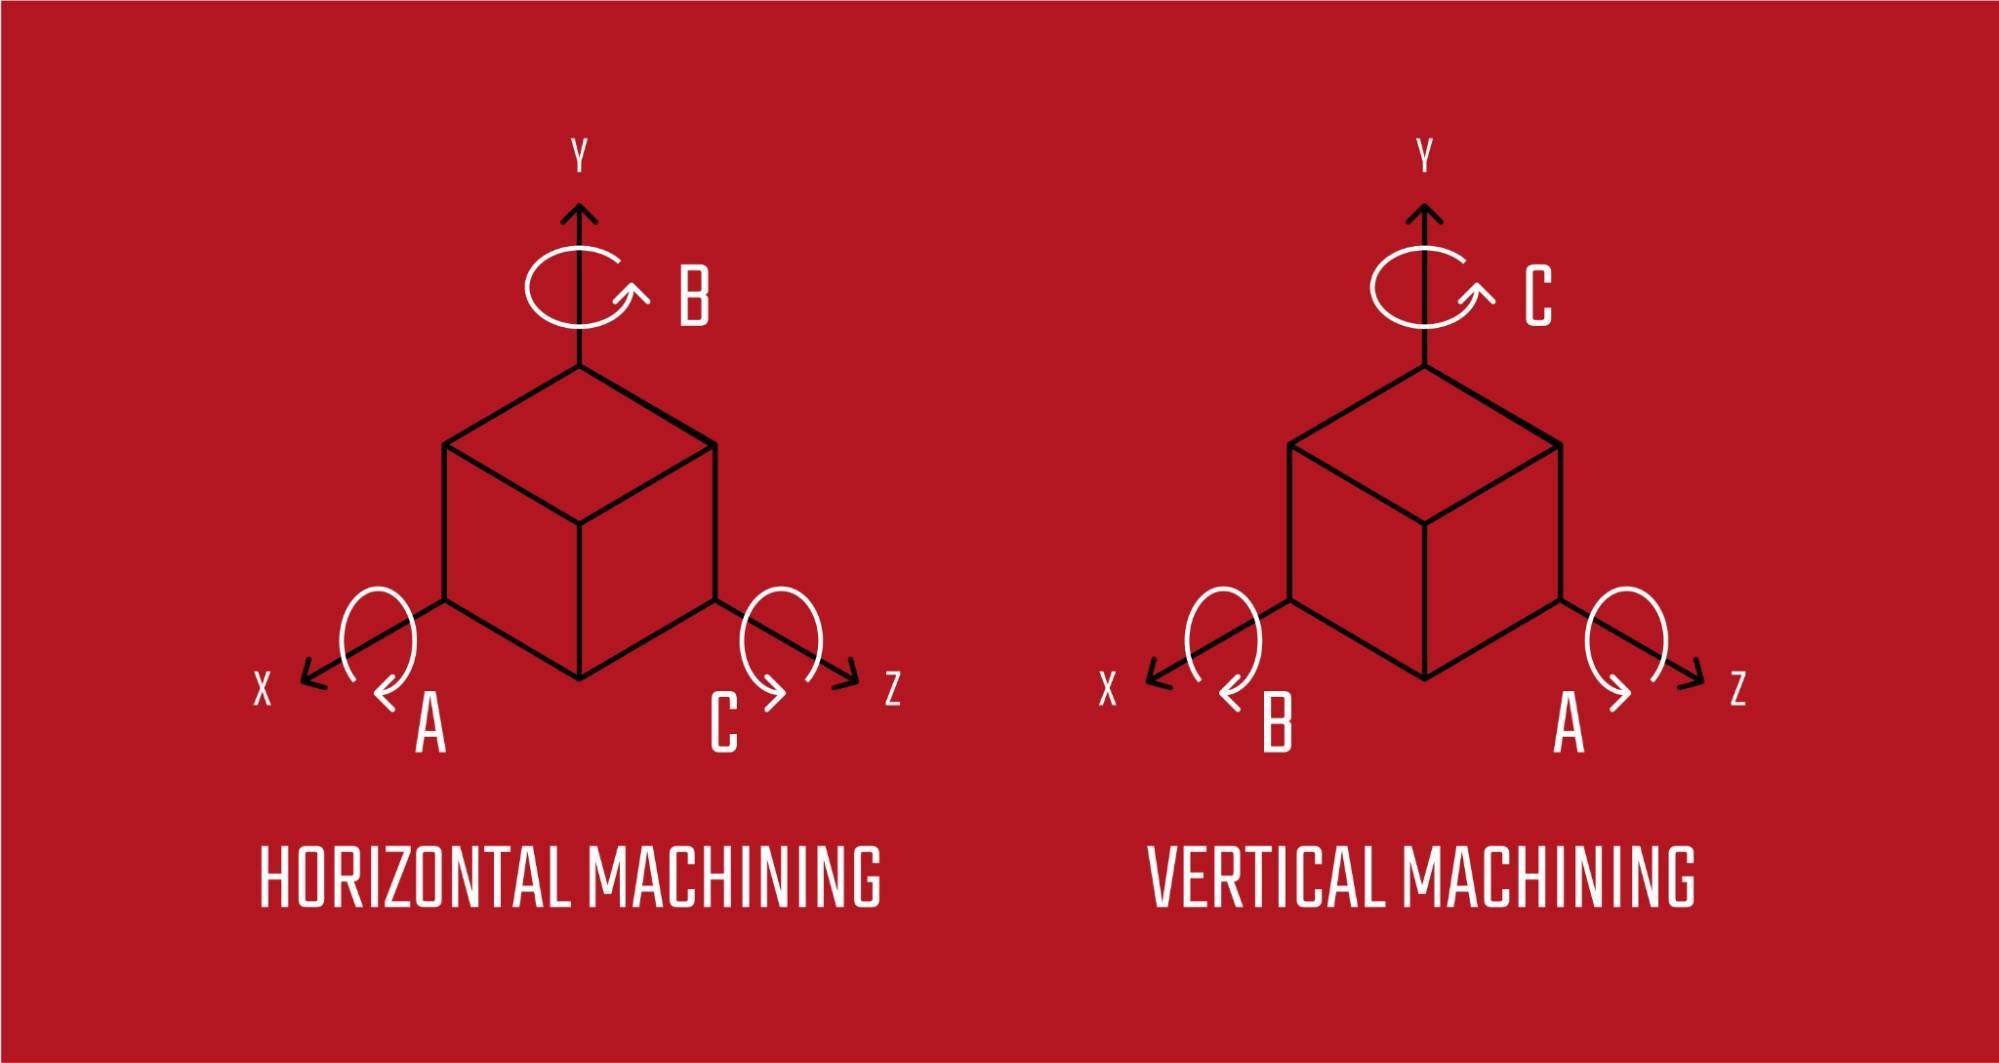 Illustration comparing how the X, Y, Z, A, and B axes differ for horizontal and vertical machine tools